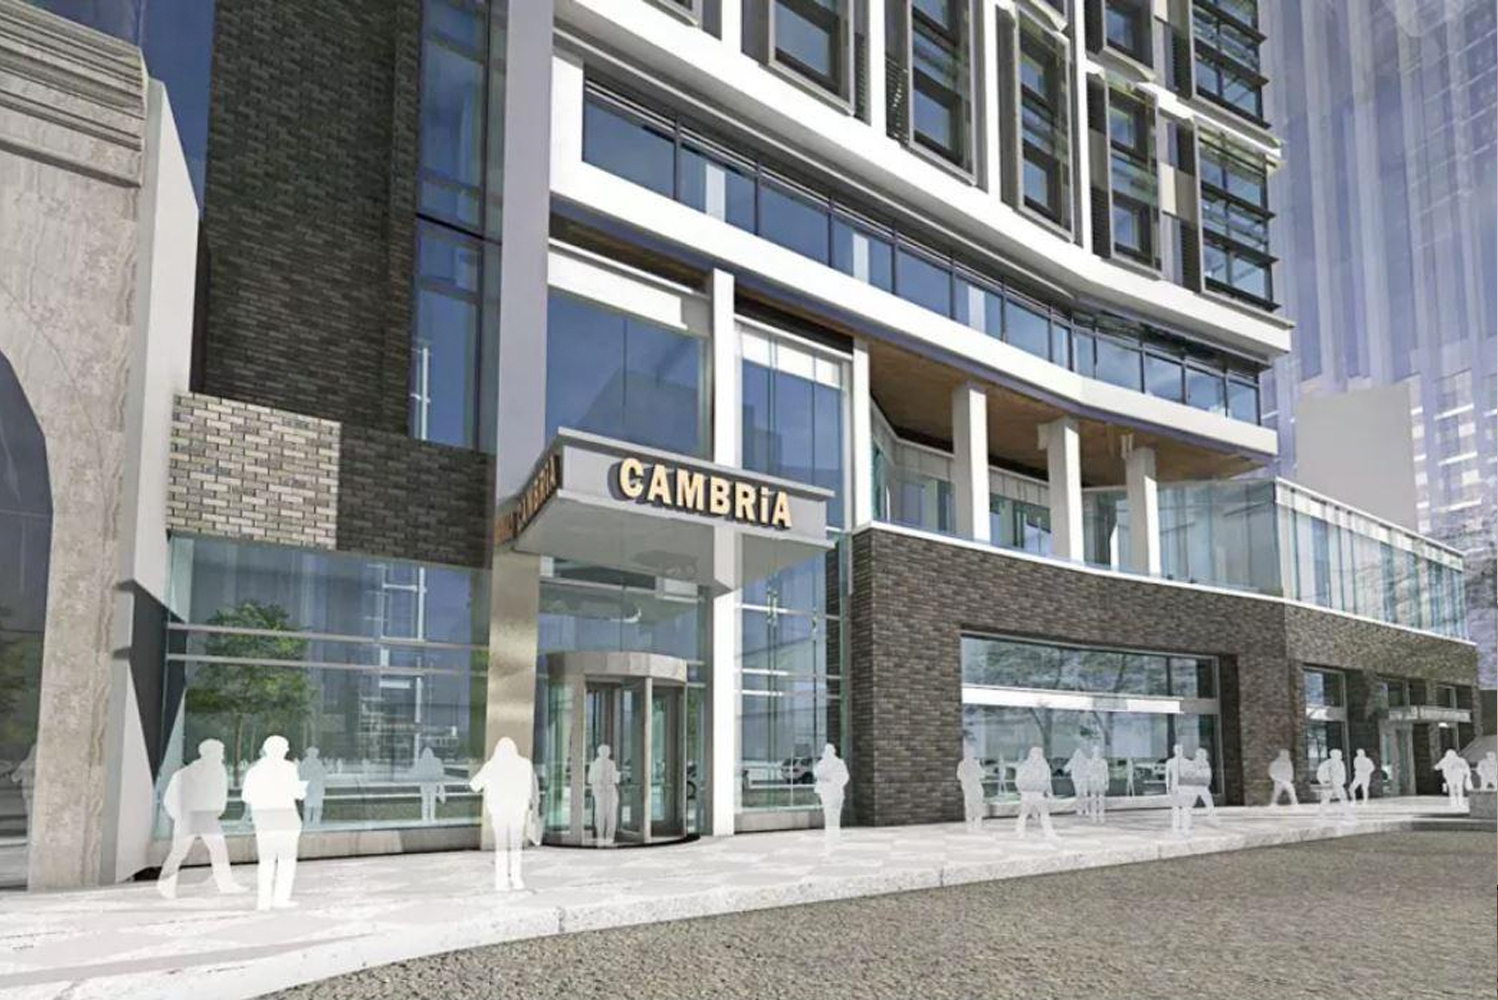 Cambria Hotel opens flagship property designed by DAS Architects in Center City Philadelphia